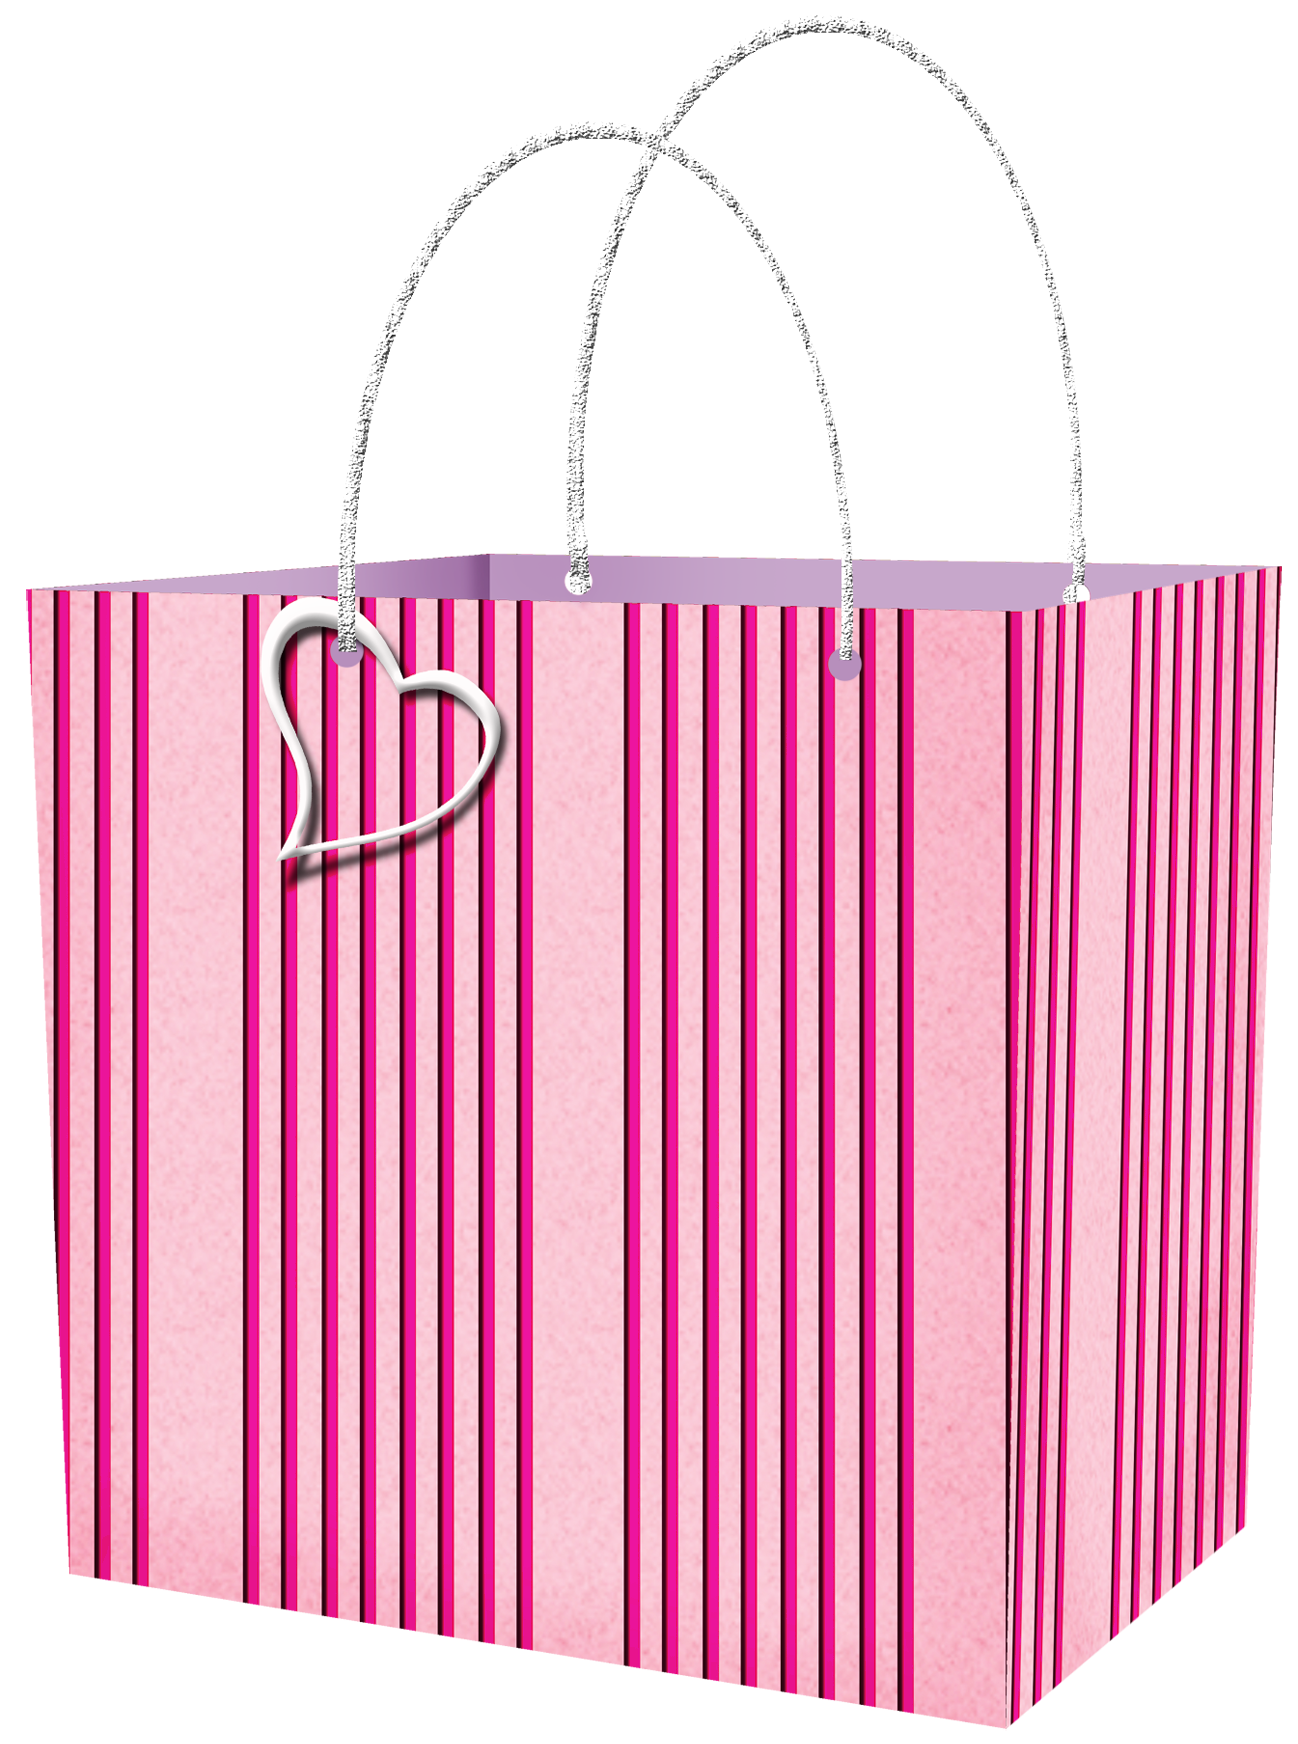 Gift clipart sack. Pink bag gallery yopriceville